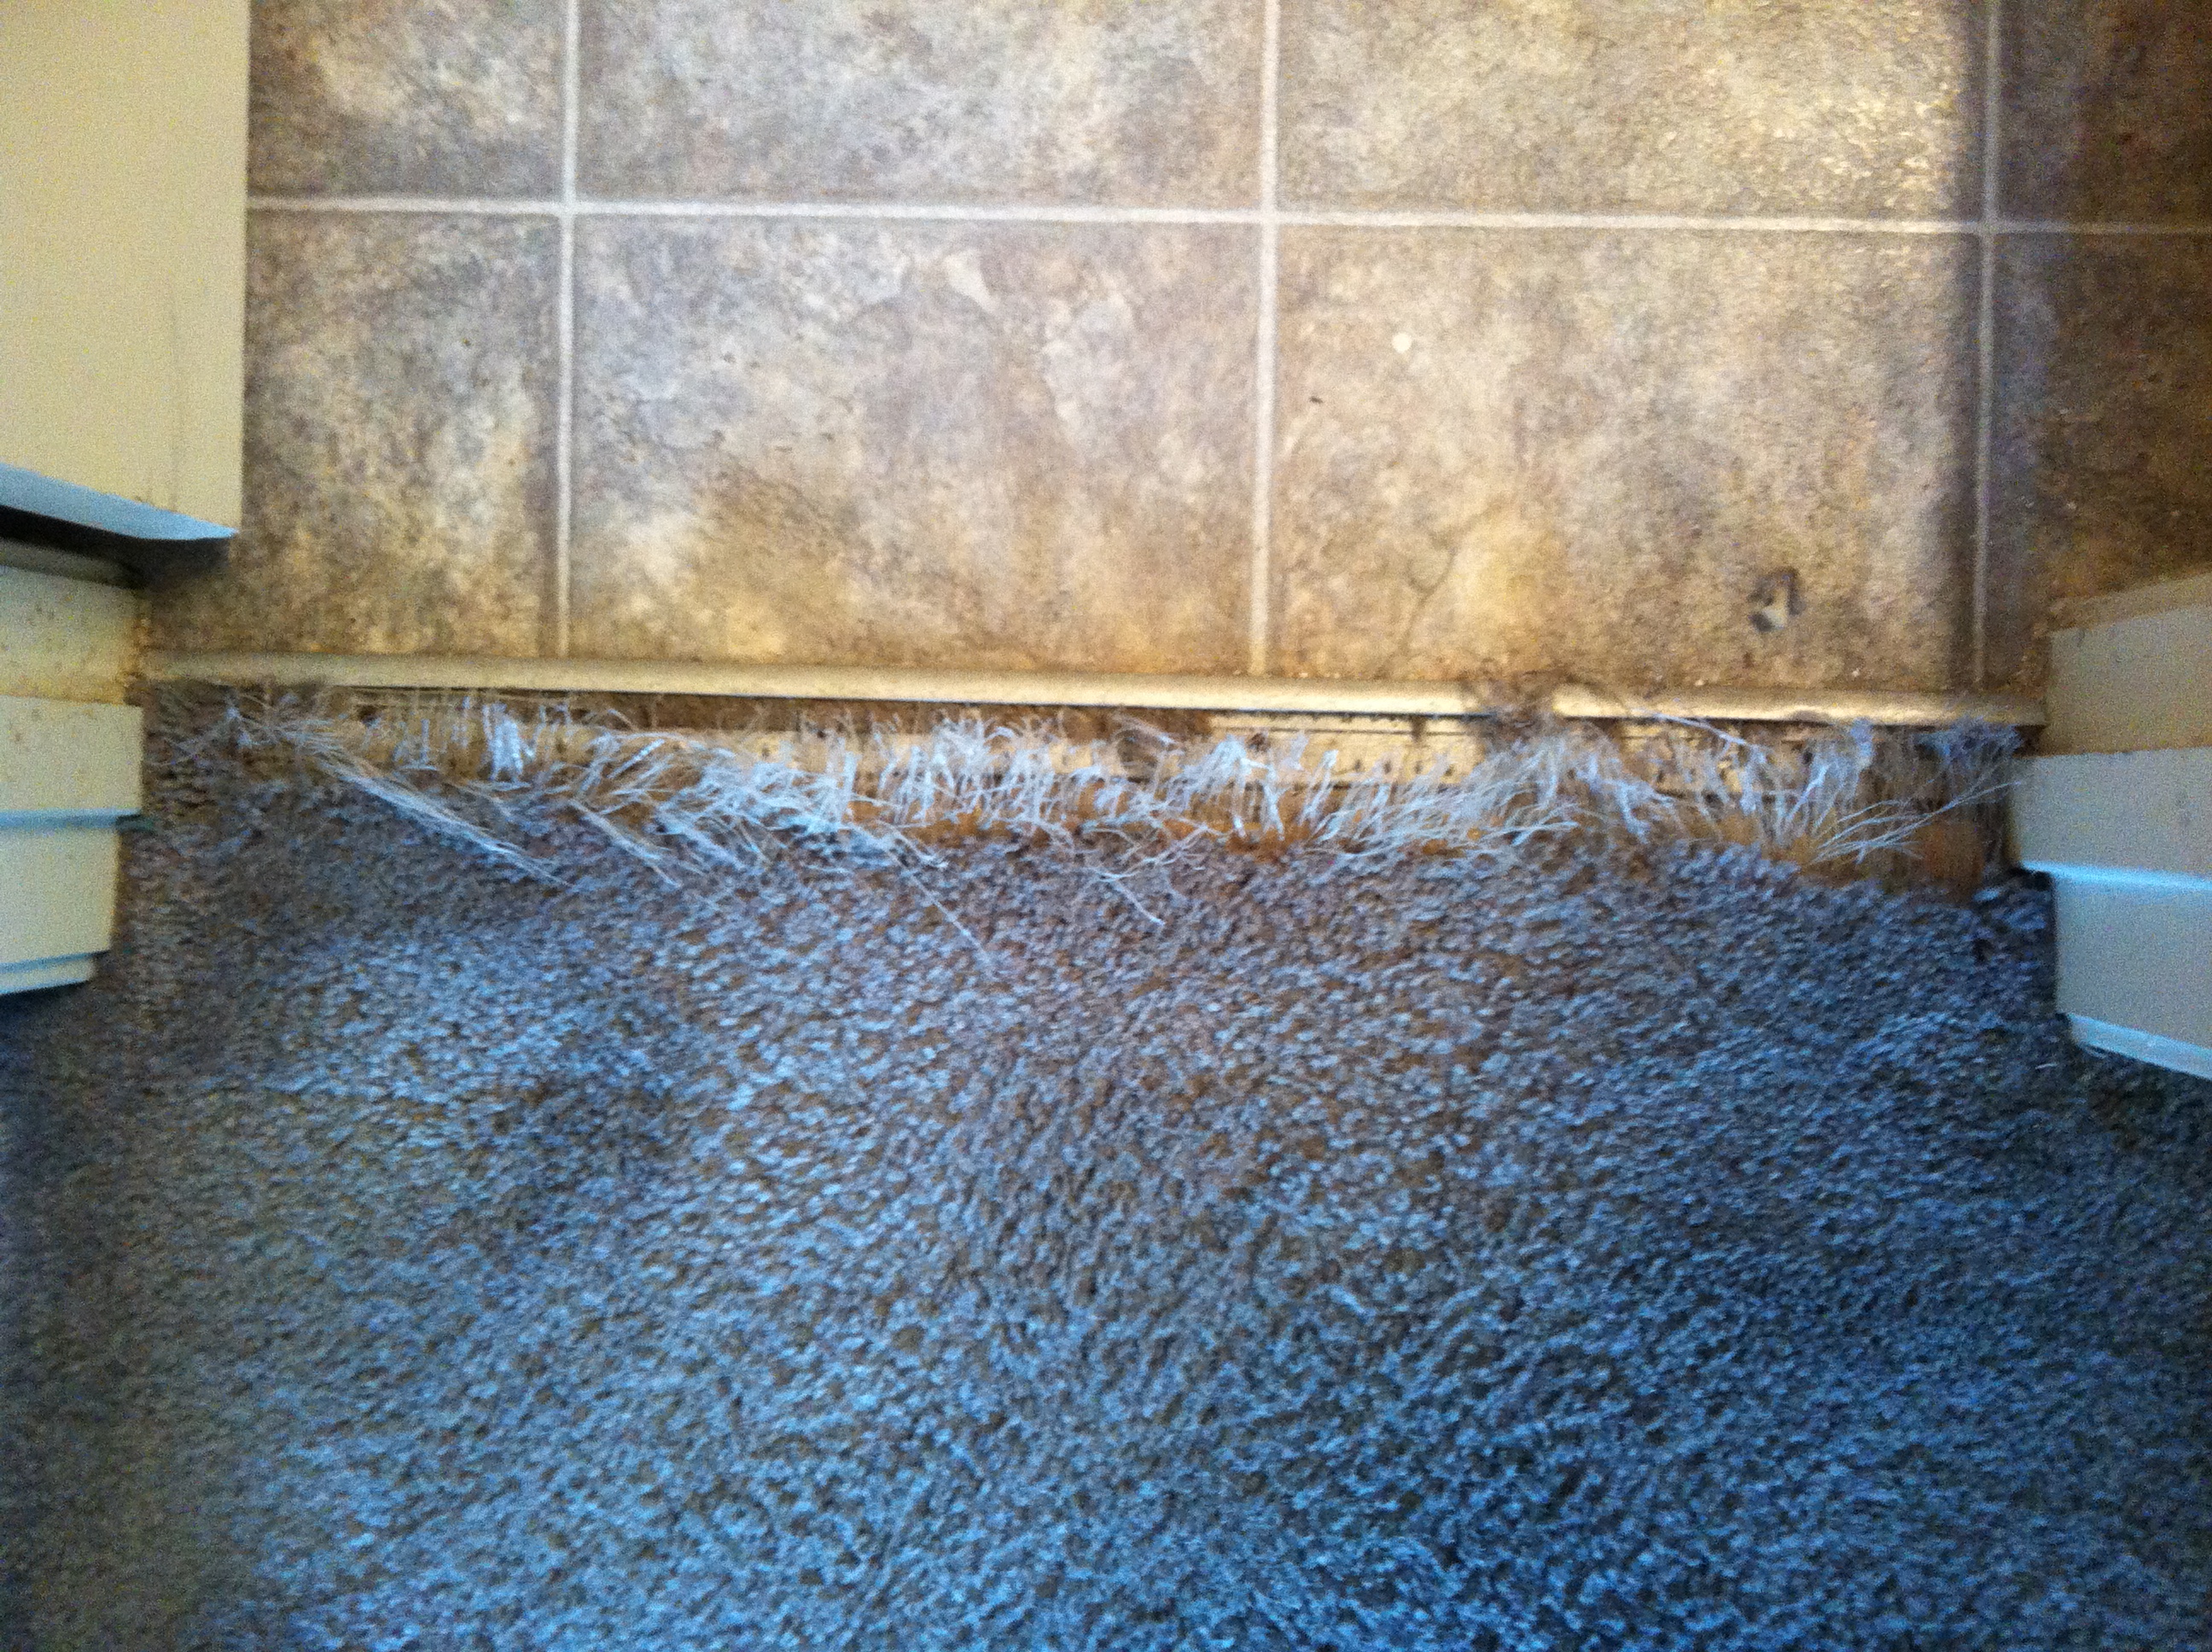 Dog Ripped Up the Carpet (Carpet Repair Services)